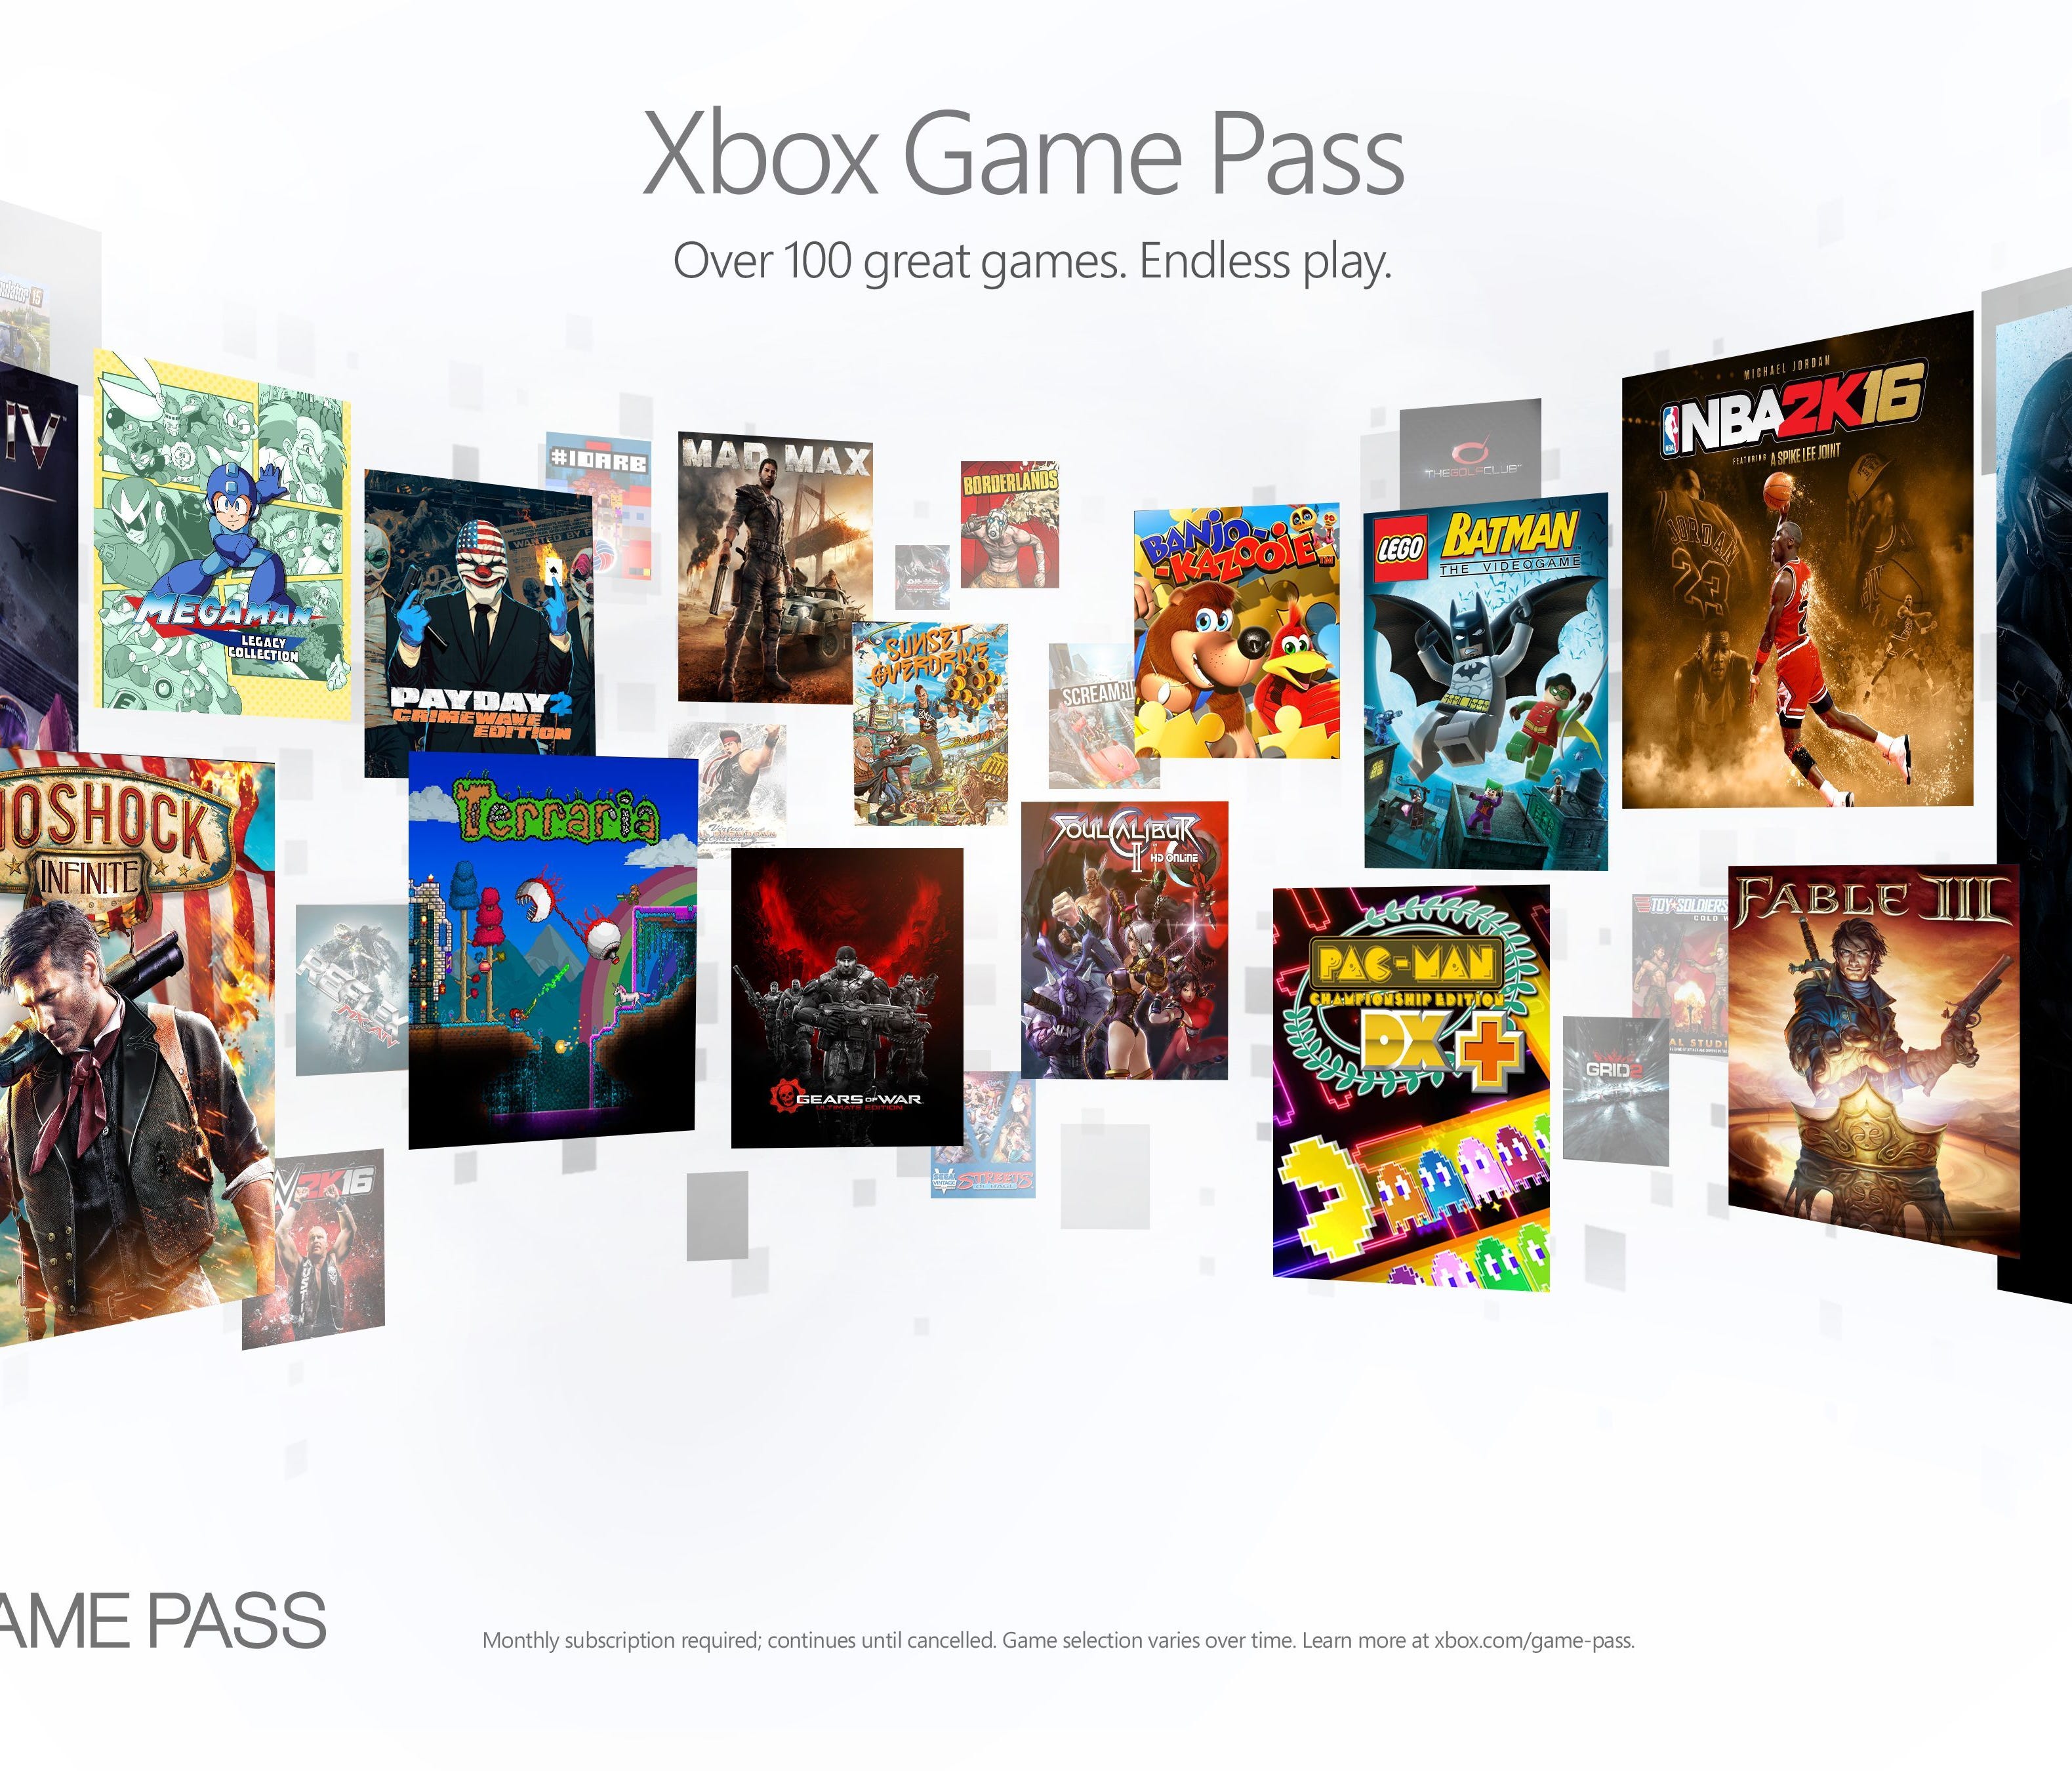 A promotional image for Xbox Game Pass, a monthly subscription service available to all Xbox One owners on June 1.